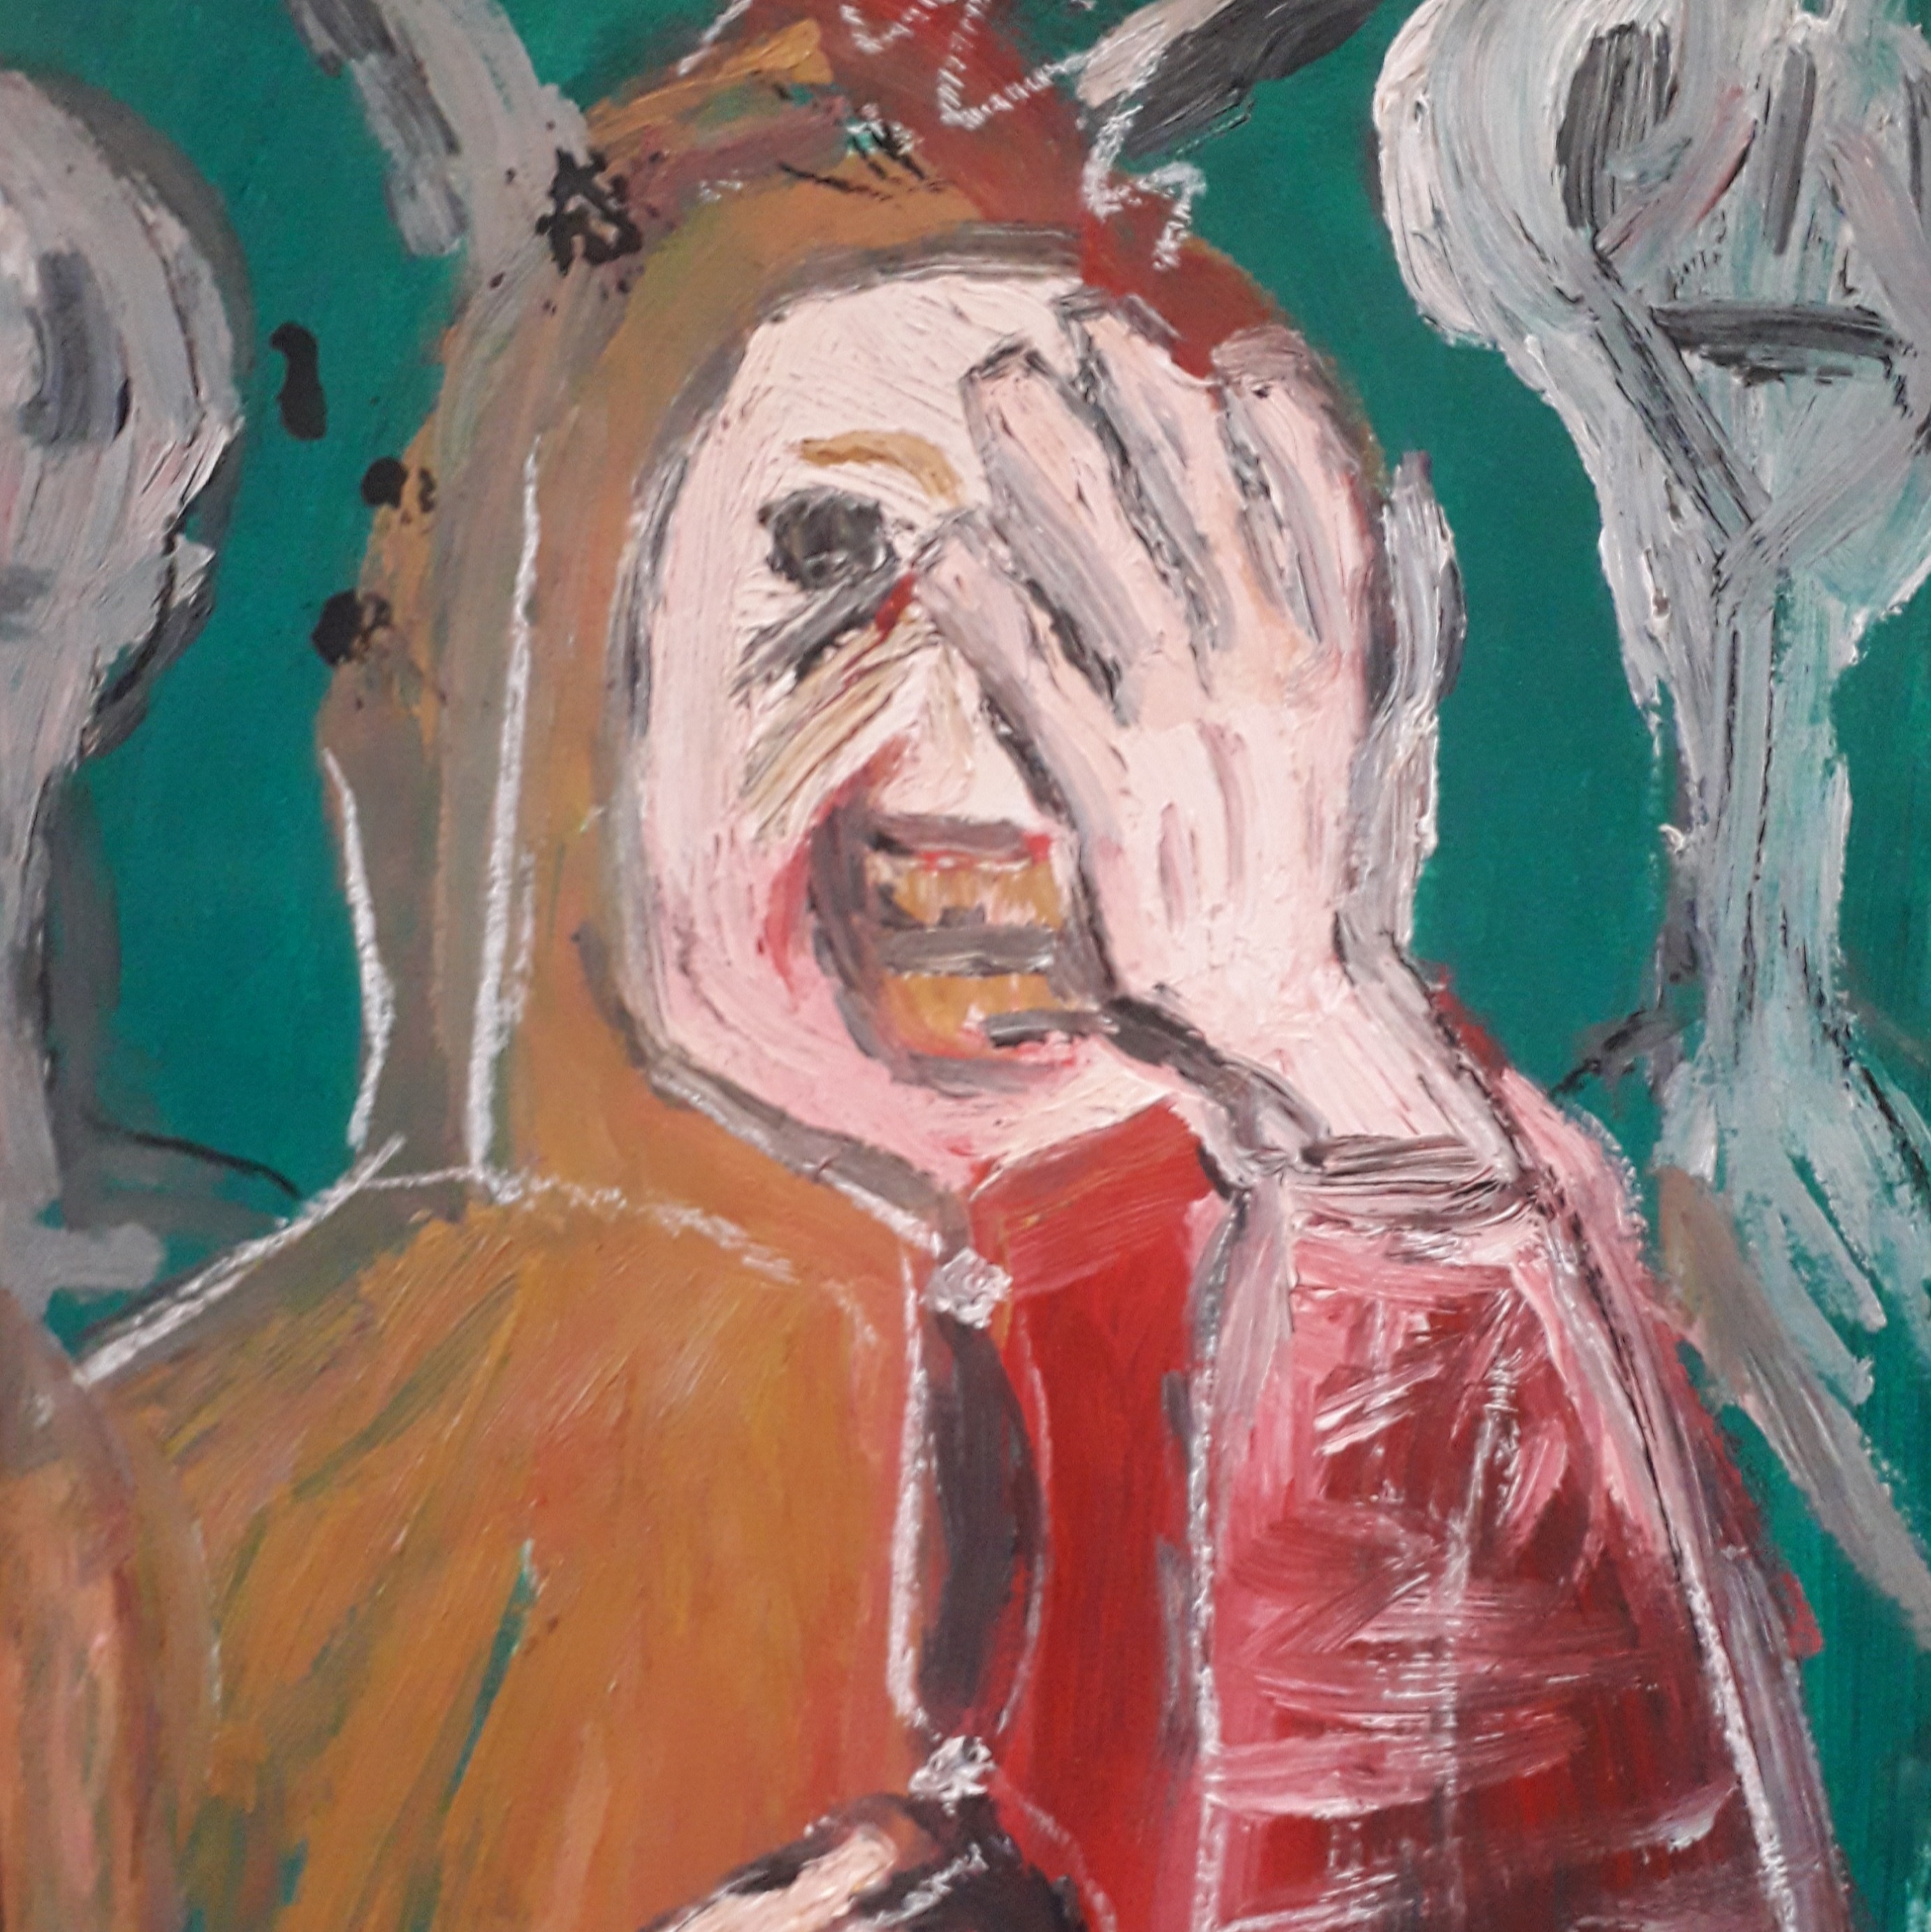 Laughing Fool Study - Oil on paper - 11×8 - £10.00